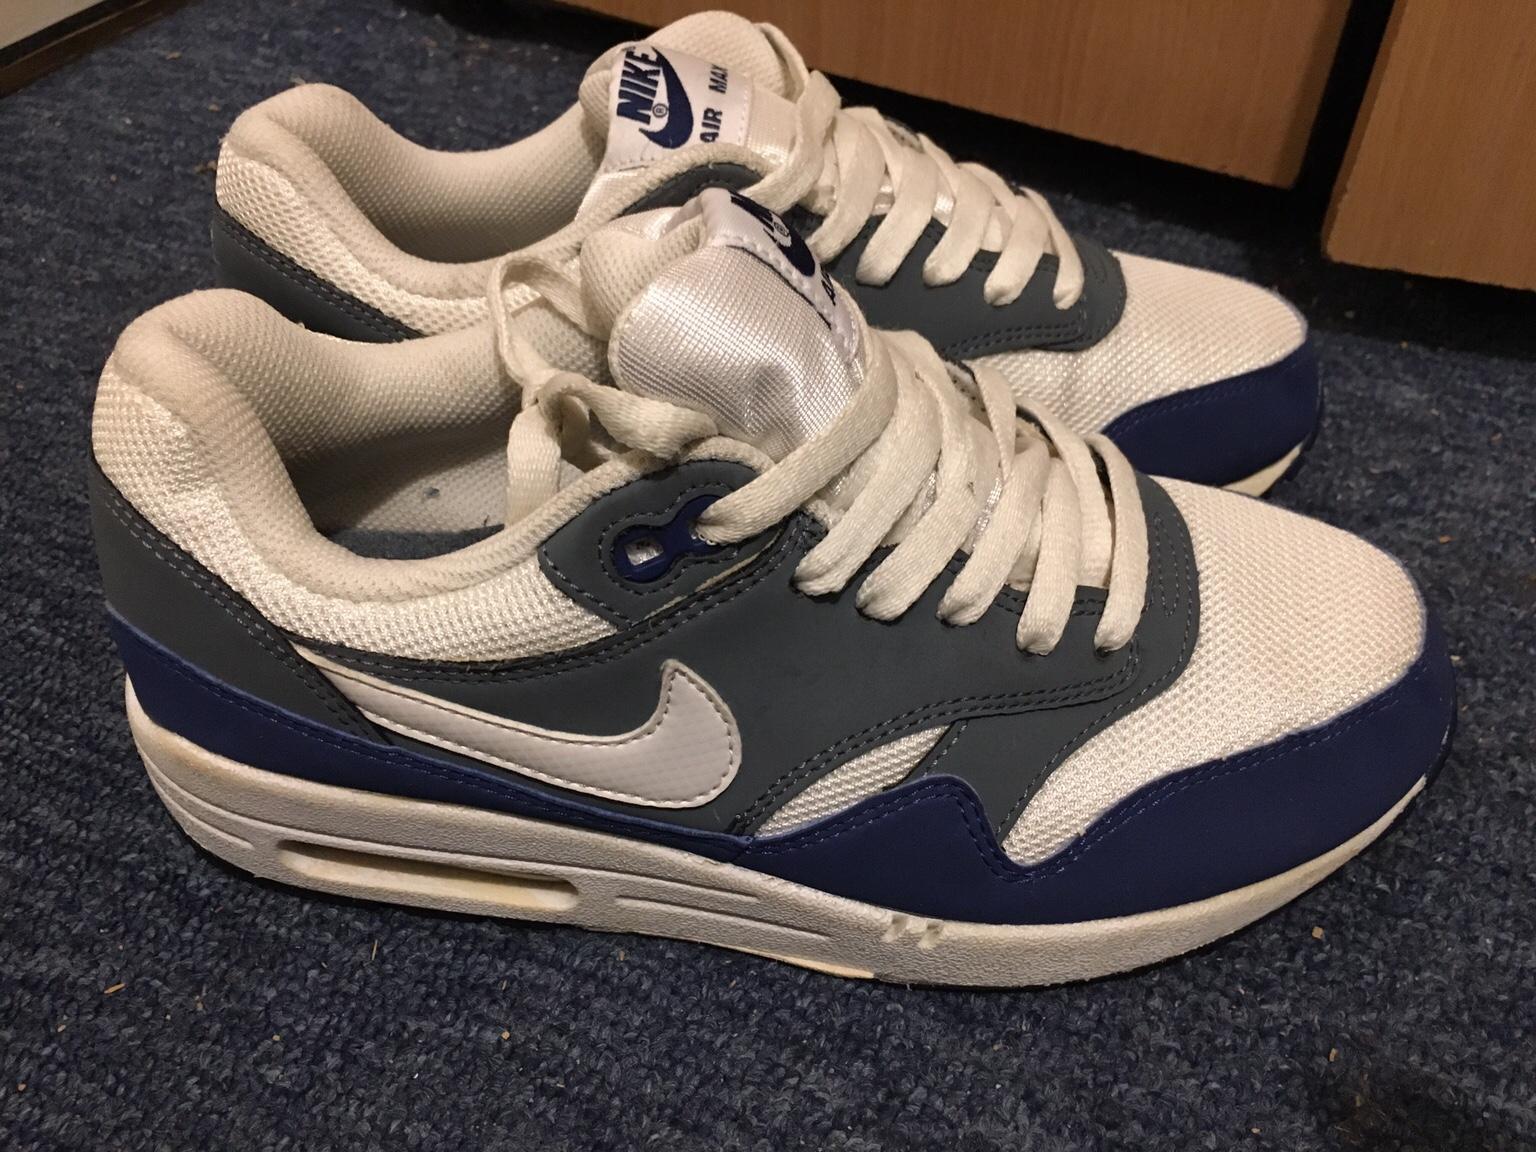 size 5.5 nike trainers